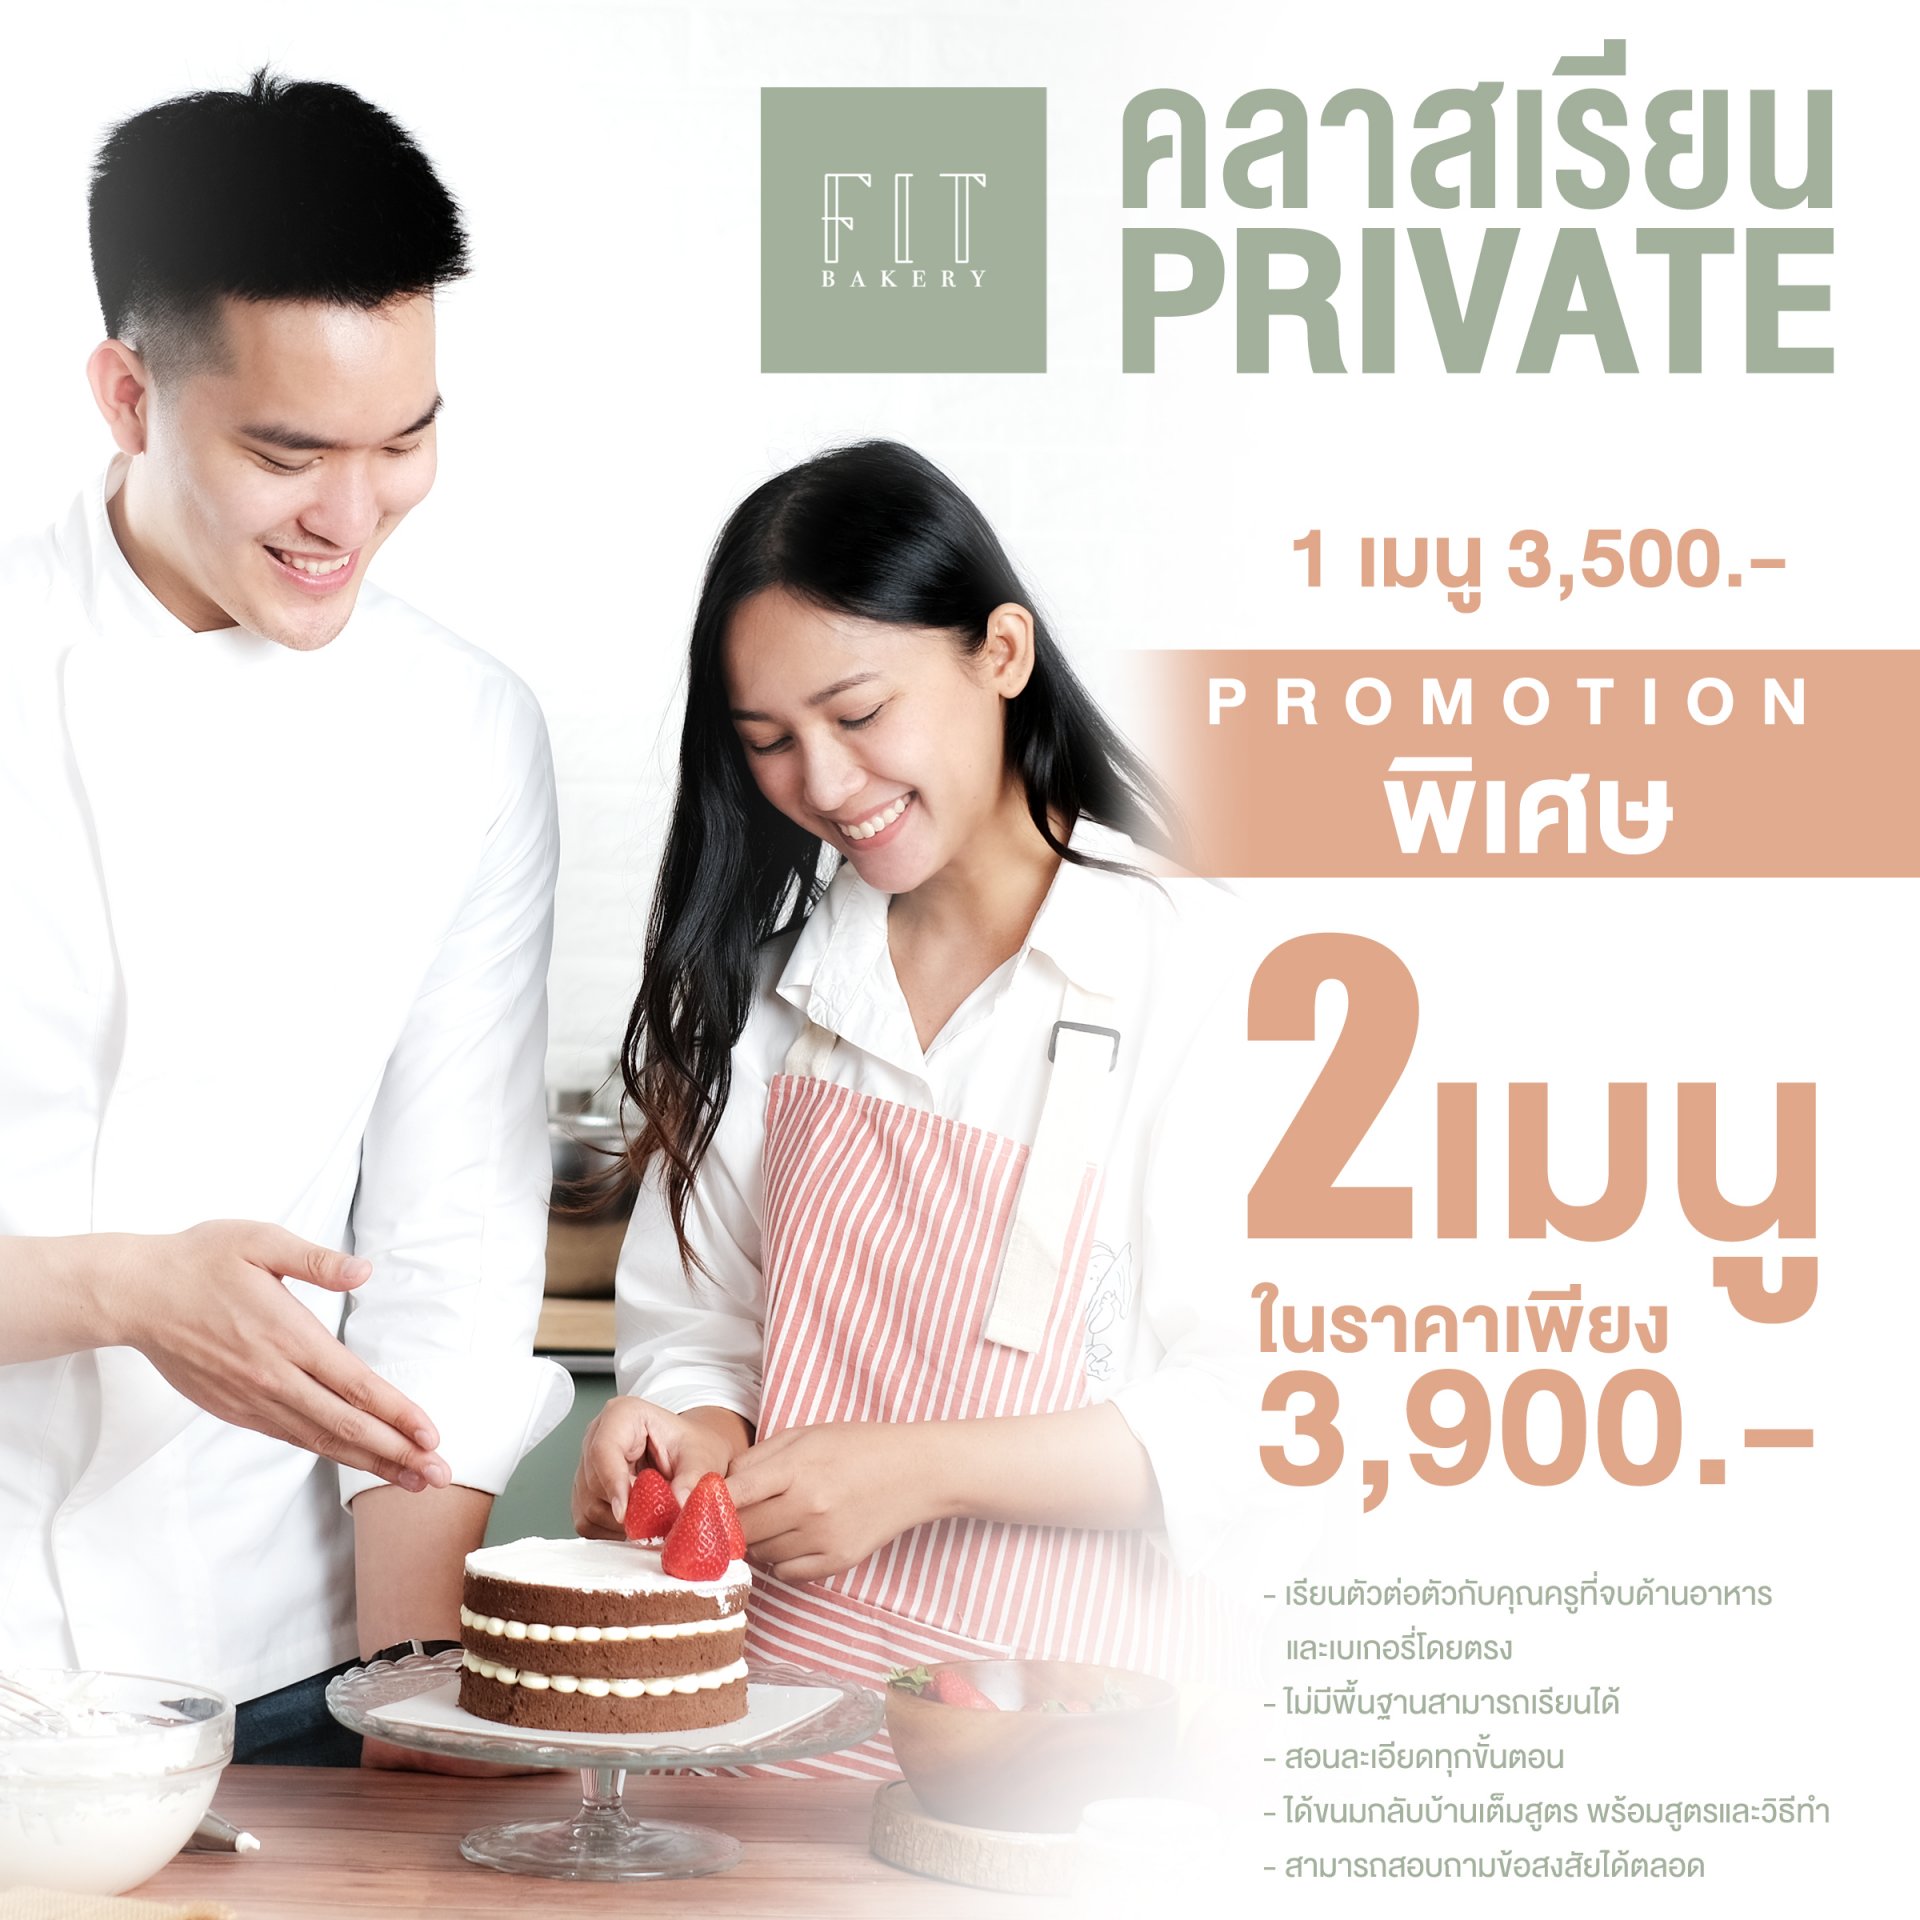 PRIVATE PROMOTION